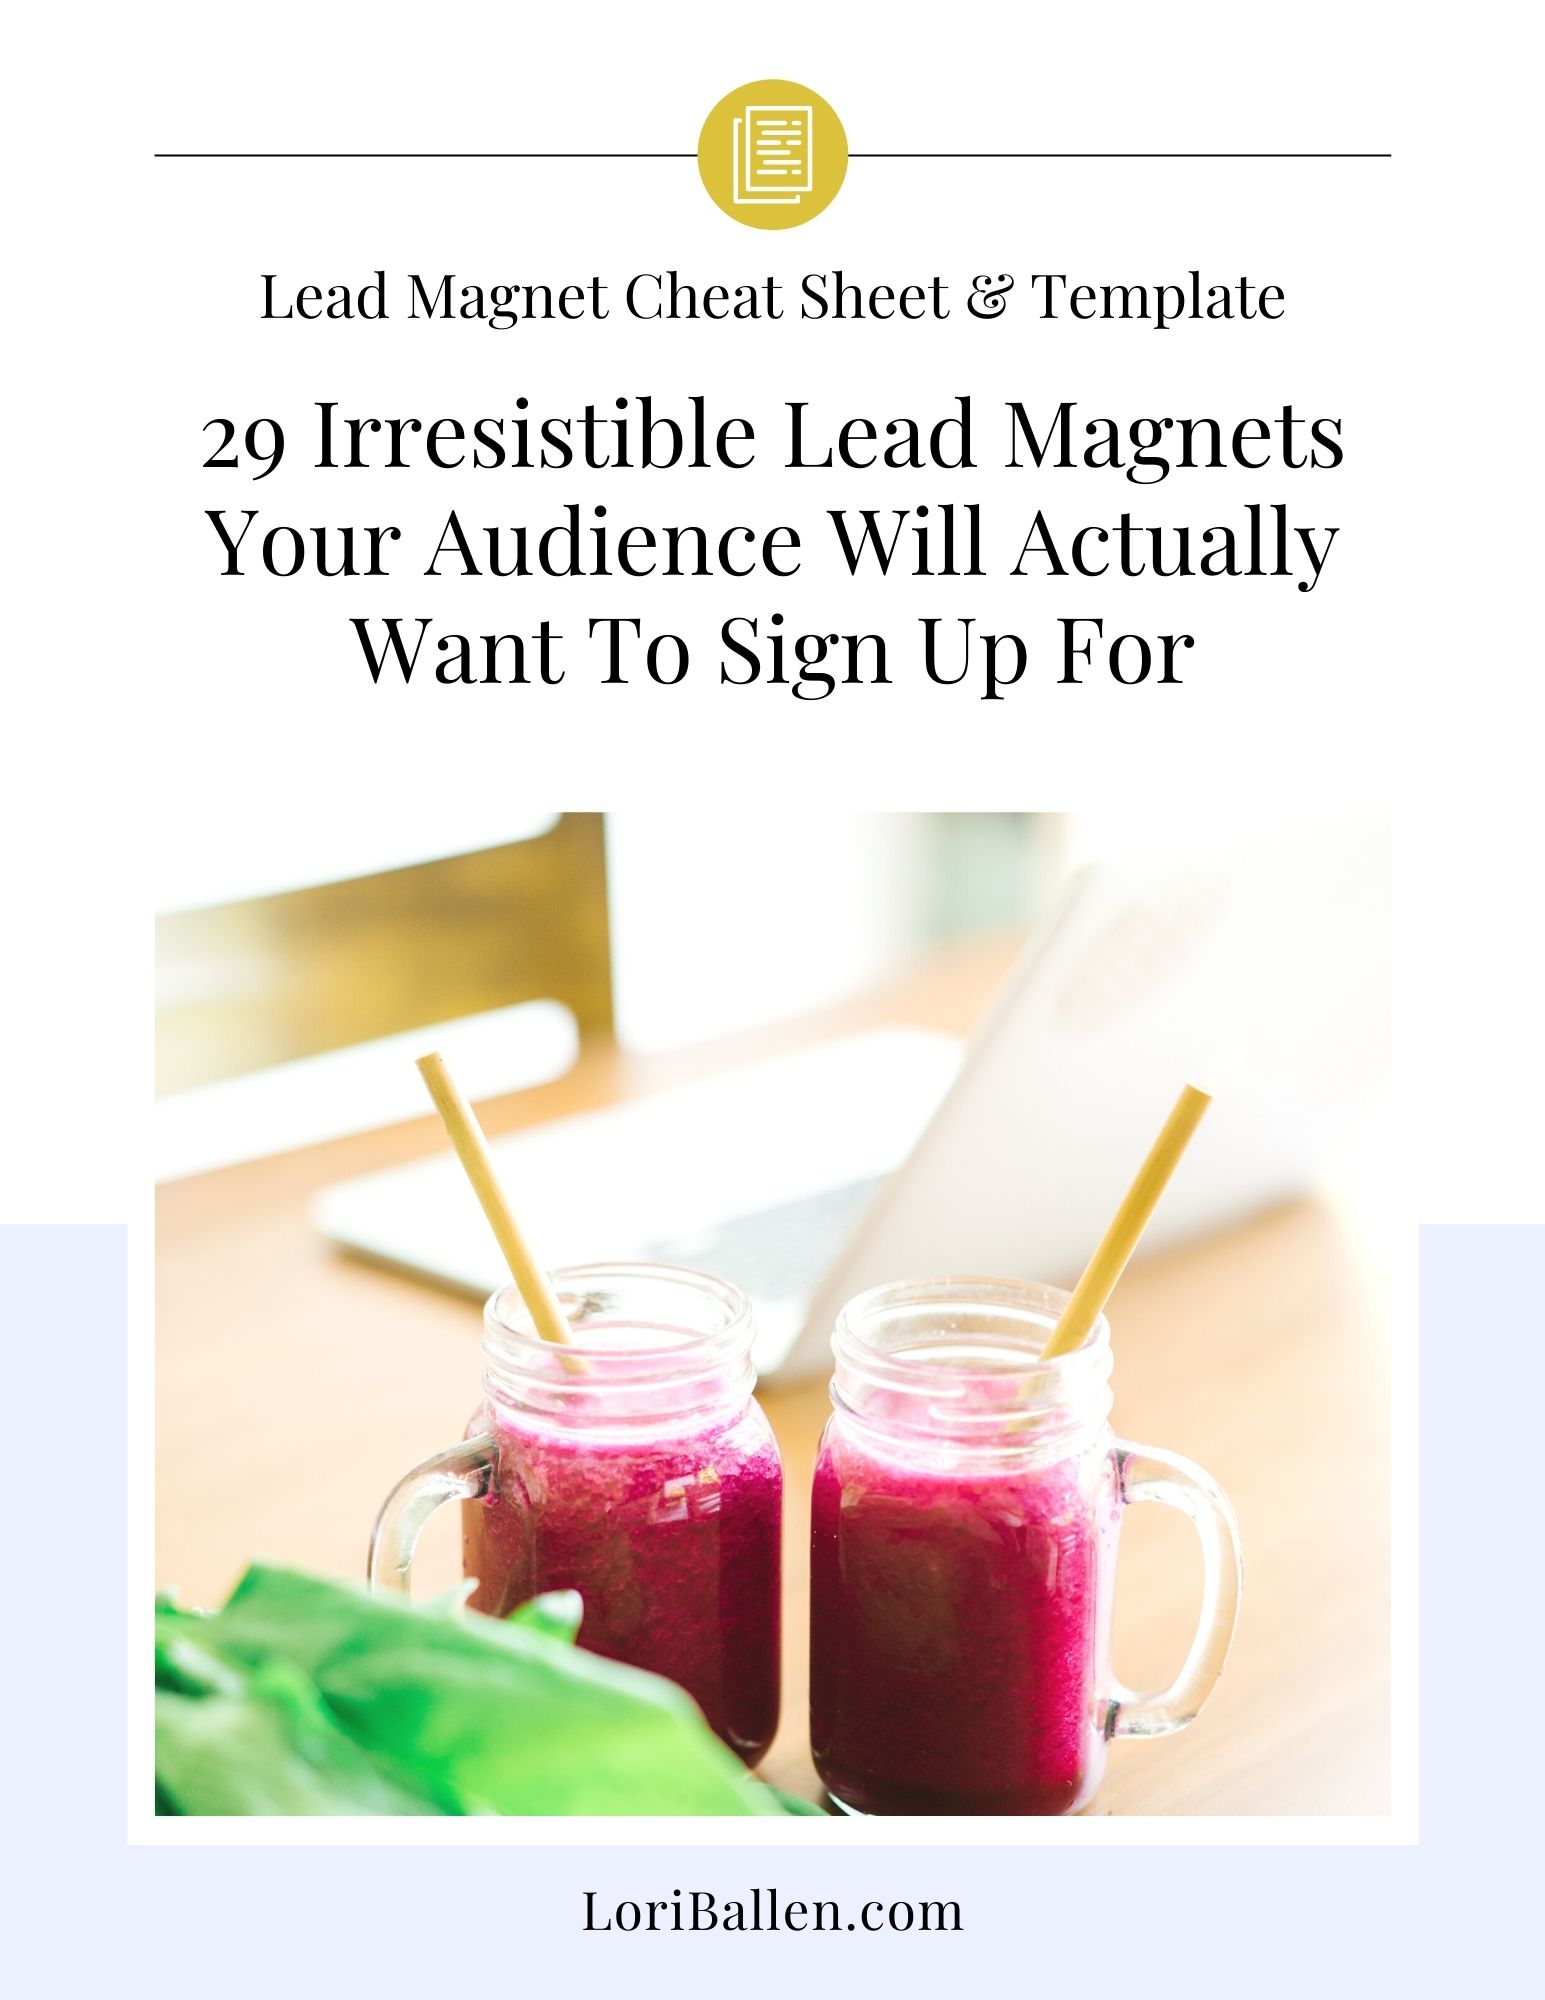 Are you looking for ways to create a lead magnet that will help you attract more leads? If so, you're in the right place. In this post, we'll share a variety of lead magnet ideas that you can use to capture the attention of potential customers. So whether you're looking for some inspiration or simply want to know what's out there, keep reading!